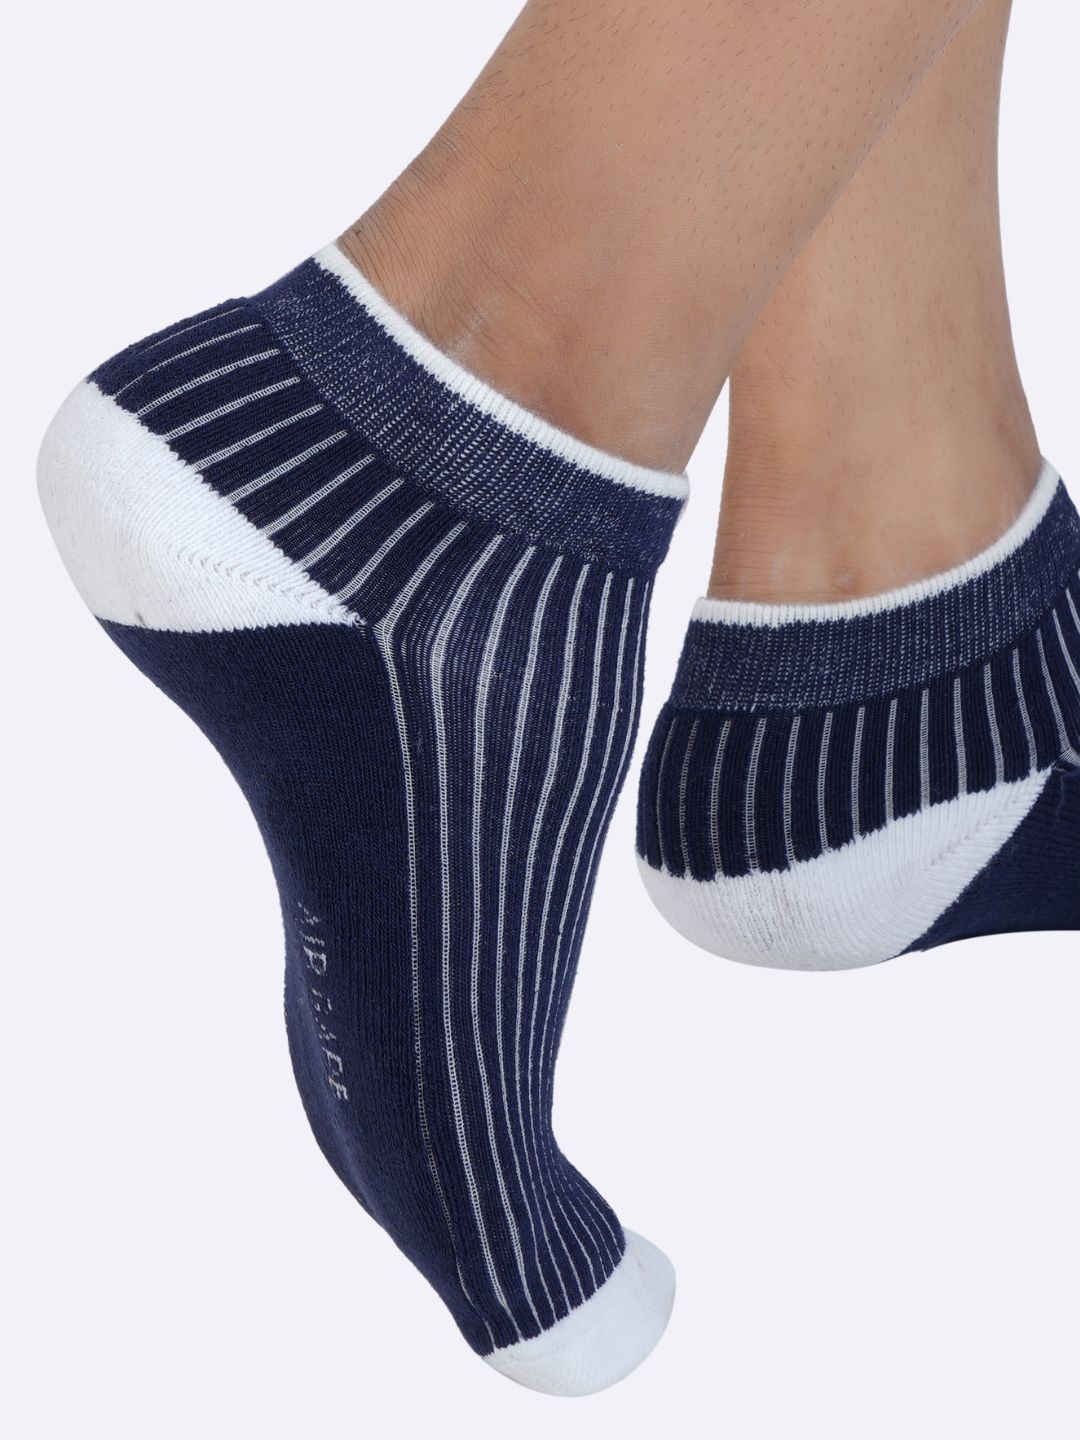 Luxury Womens Sport Sock Breathable Pure Cotton, Absorbent, Short Boat  Monogrammed Socks With Garter Box From Clothing1314, $2.39